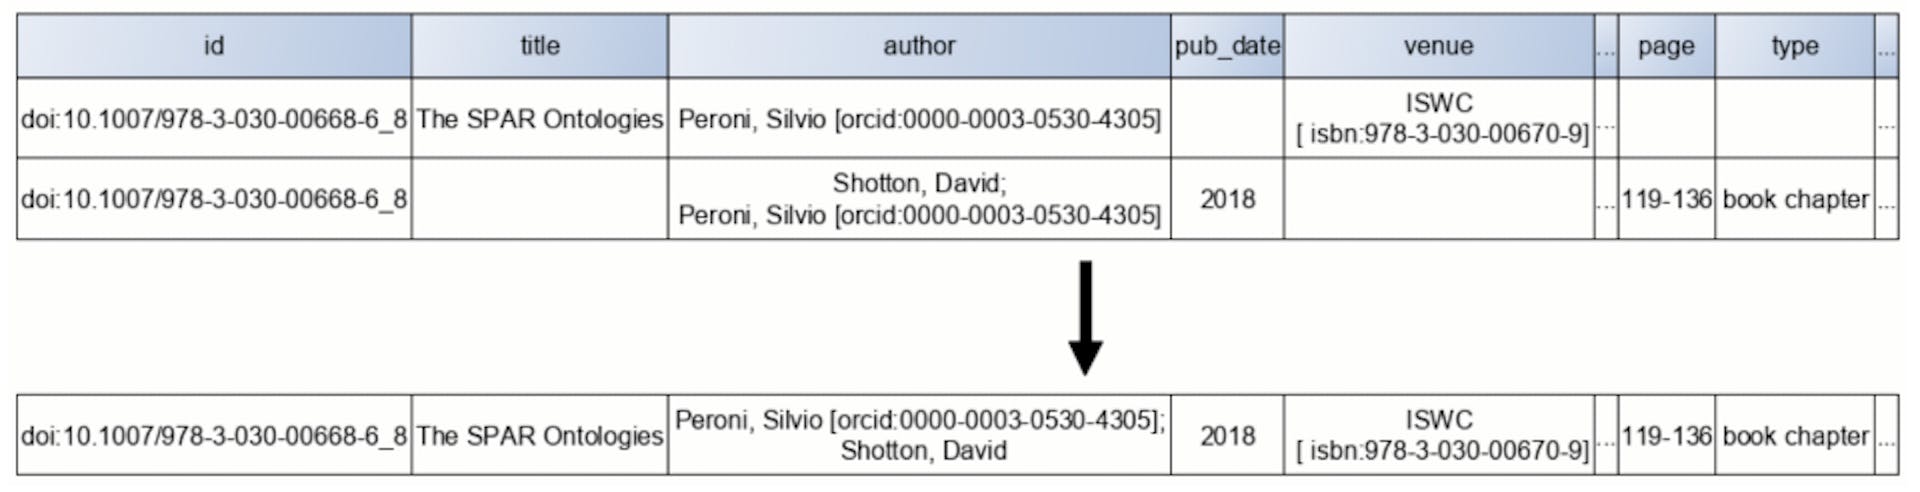 Figure 4: During a merge, the first information found takes precedence. In this example, David Shotton is inserted after Silvio Peroni in the list of authors because Peroni was already recorded as the first author, even if Shotton appears before Peroni in the second occurrence